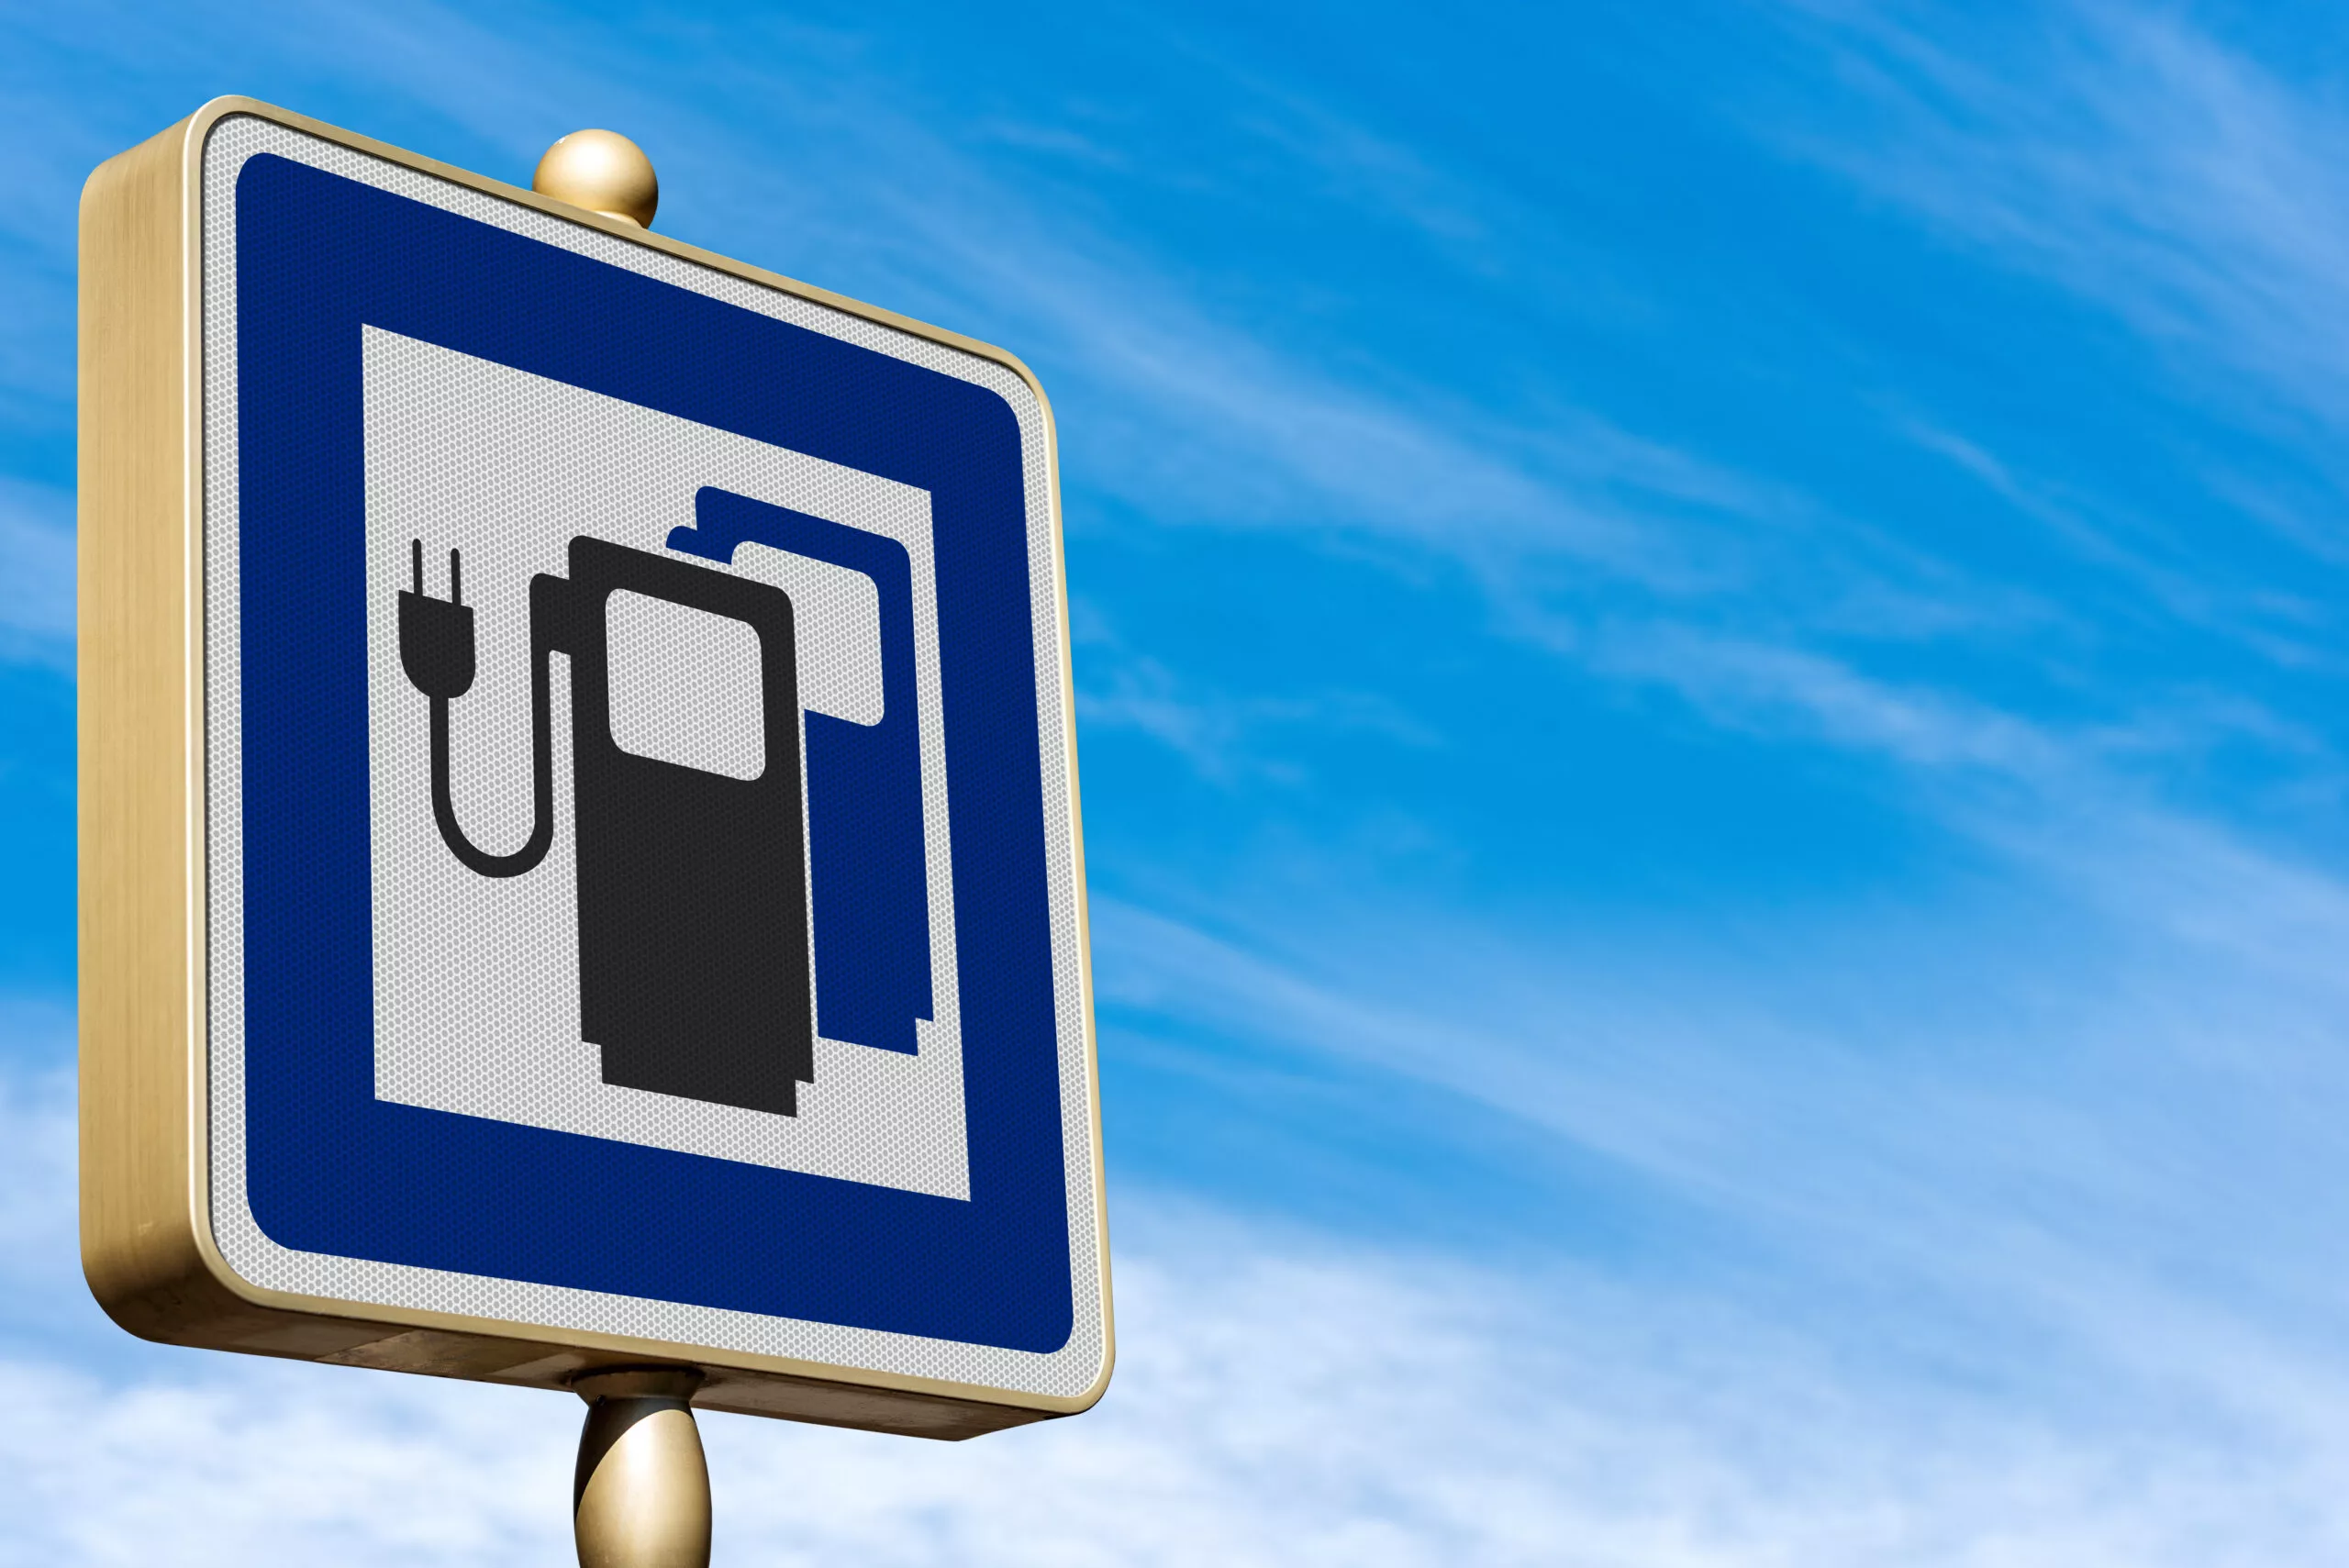 Road sign for an Electric Vehicle Charging Station on Blue sky w